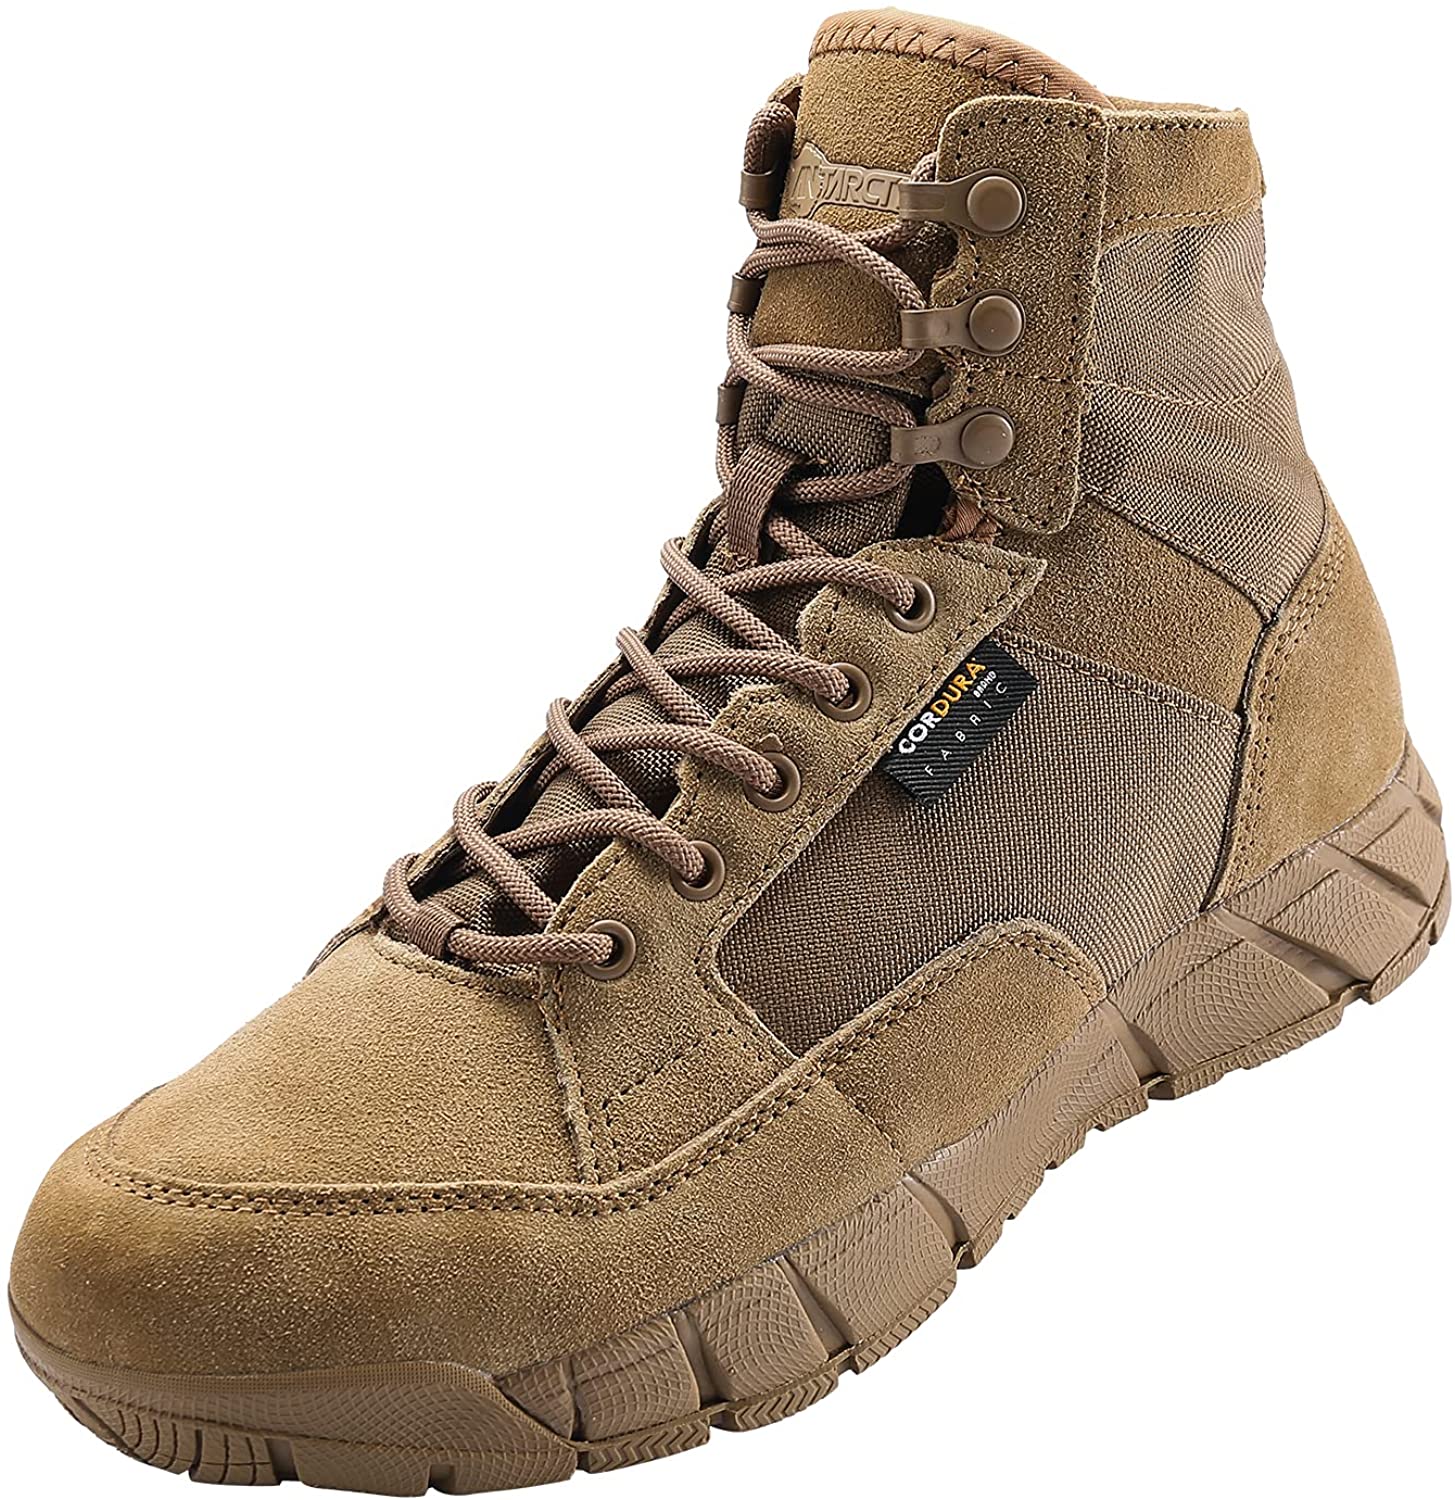 ANTARCTICA Mens Lightweight Military Tactical Boots for Hiking Work Boots